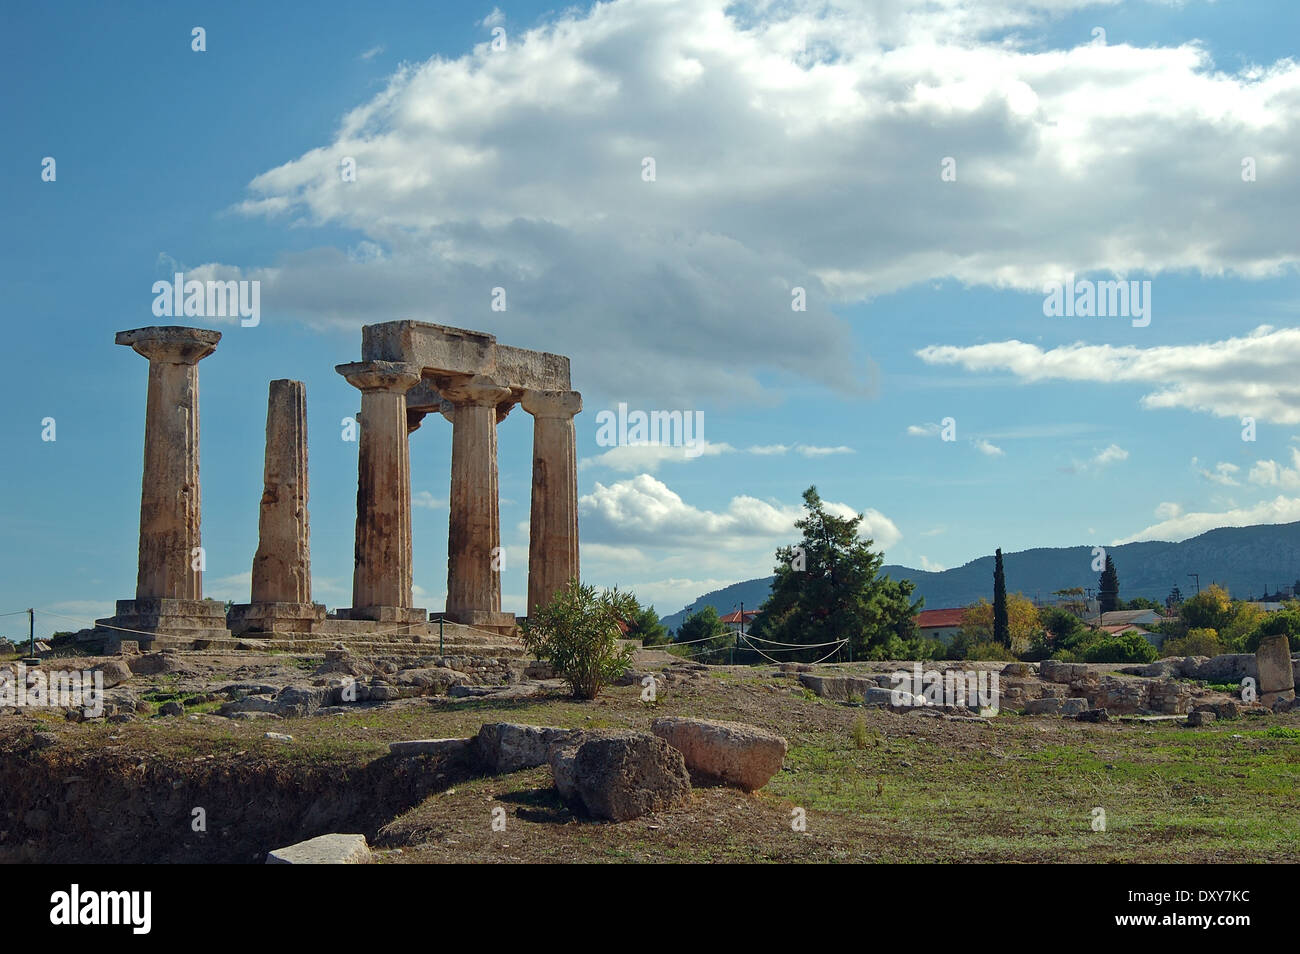 Ruined columns of ancient Corinth, Greece Stock Photo